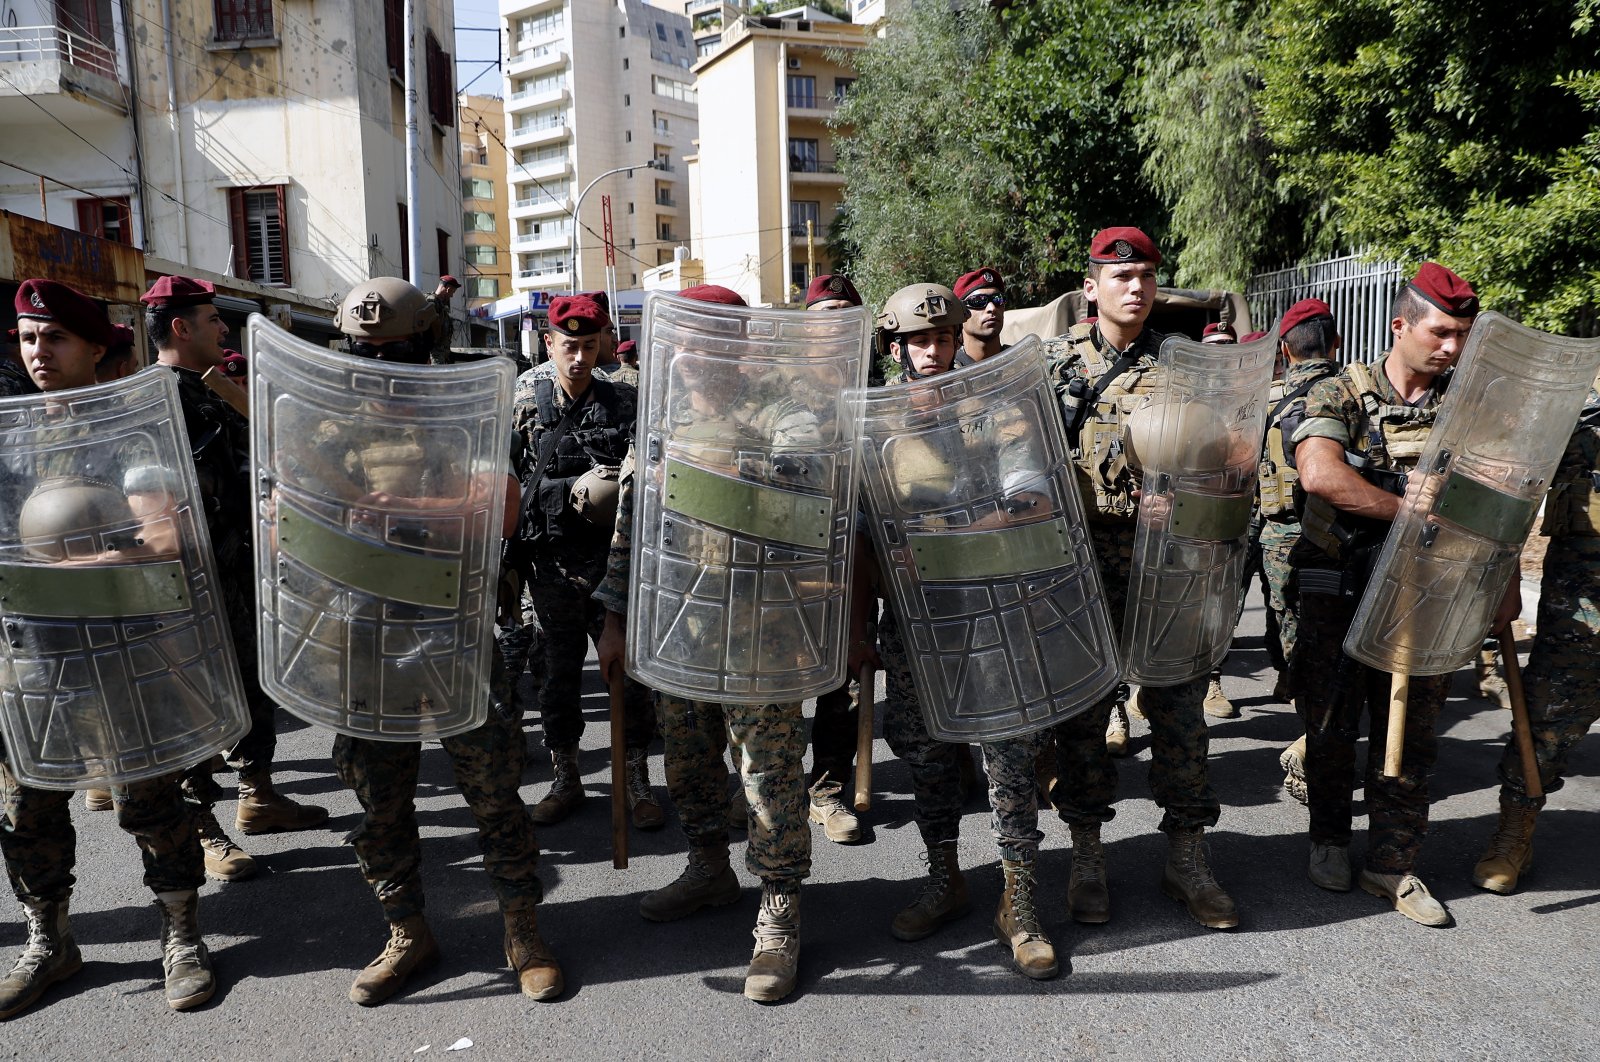 Lebanese troops stand guard near the Justice Palace as supporters of the Hezbollah and Amal groups protest against Judge Tarek Bitar who is investigating last year's deadly seaport blast, Beirut, Lebanon, Oct. 14, 2021. (AP Photo)